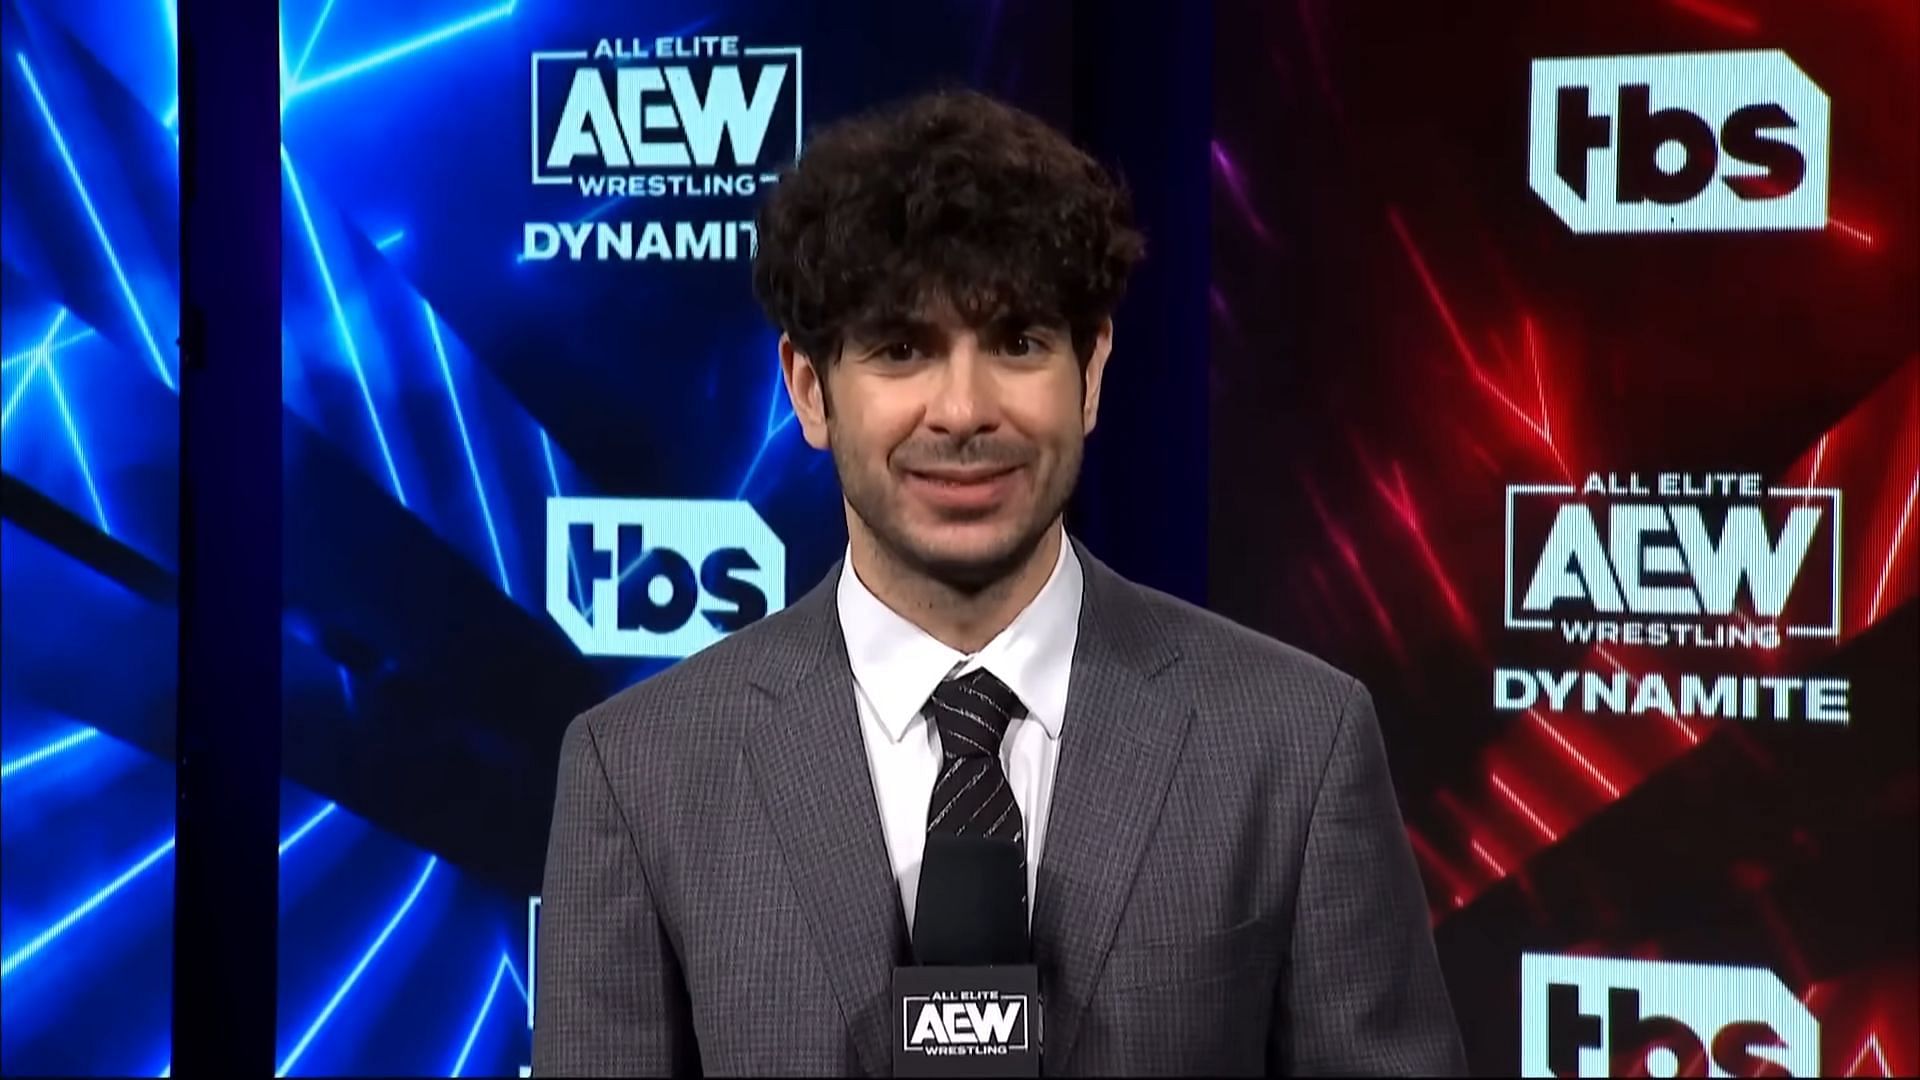 Tony Khan is the President of All Elite Wrestling [Image Credits: AEW